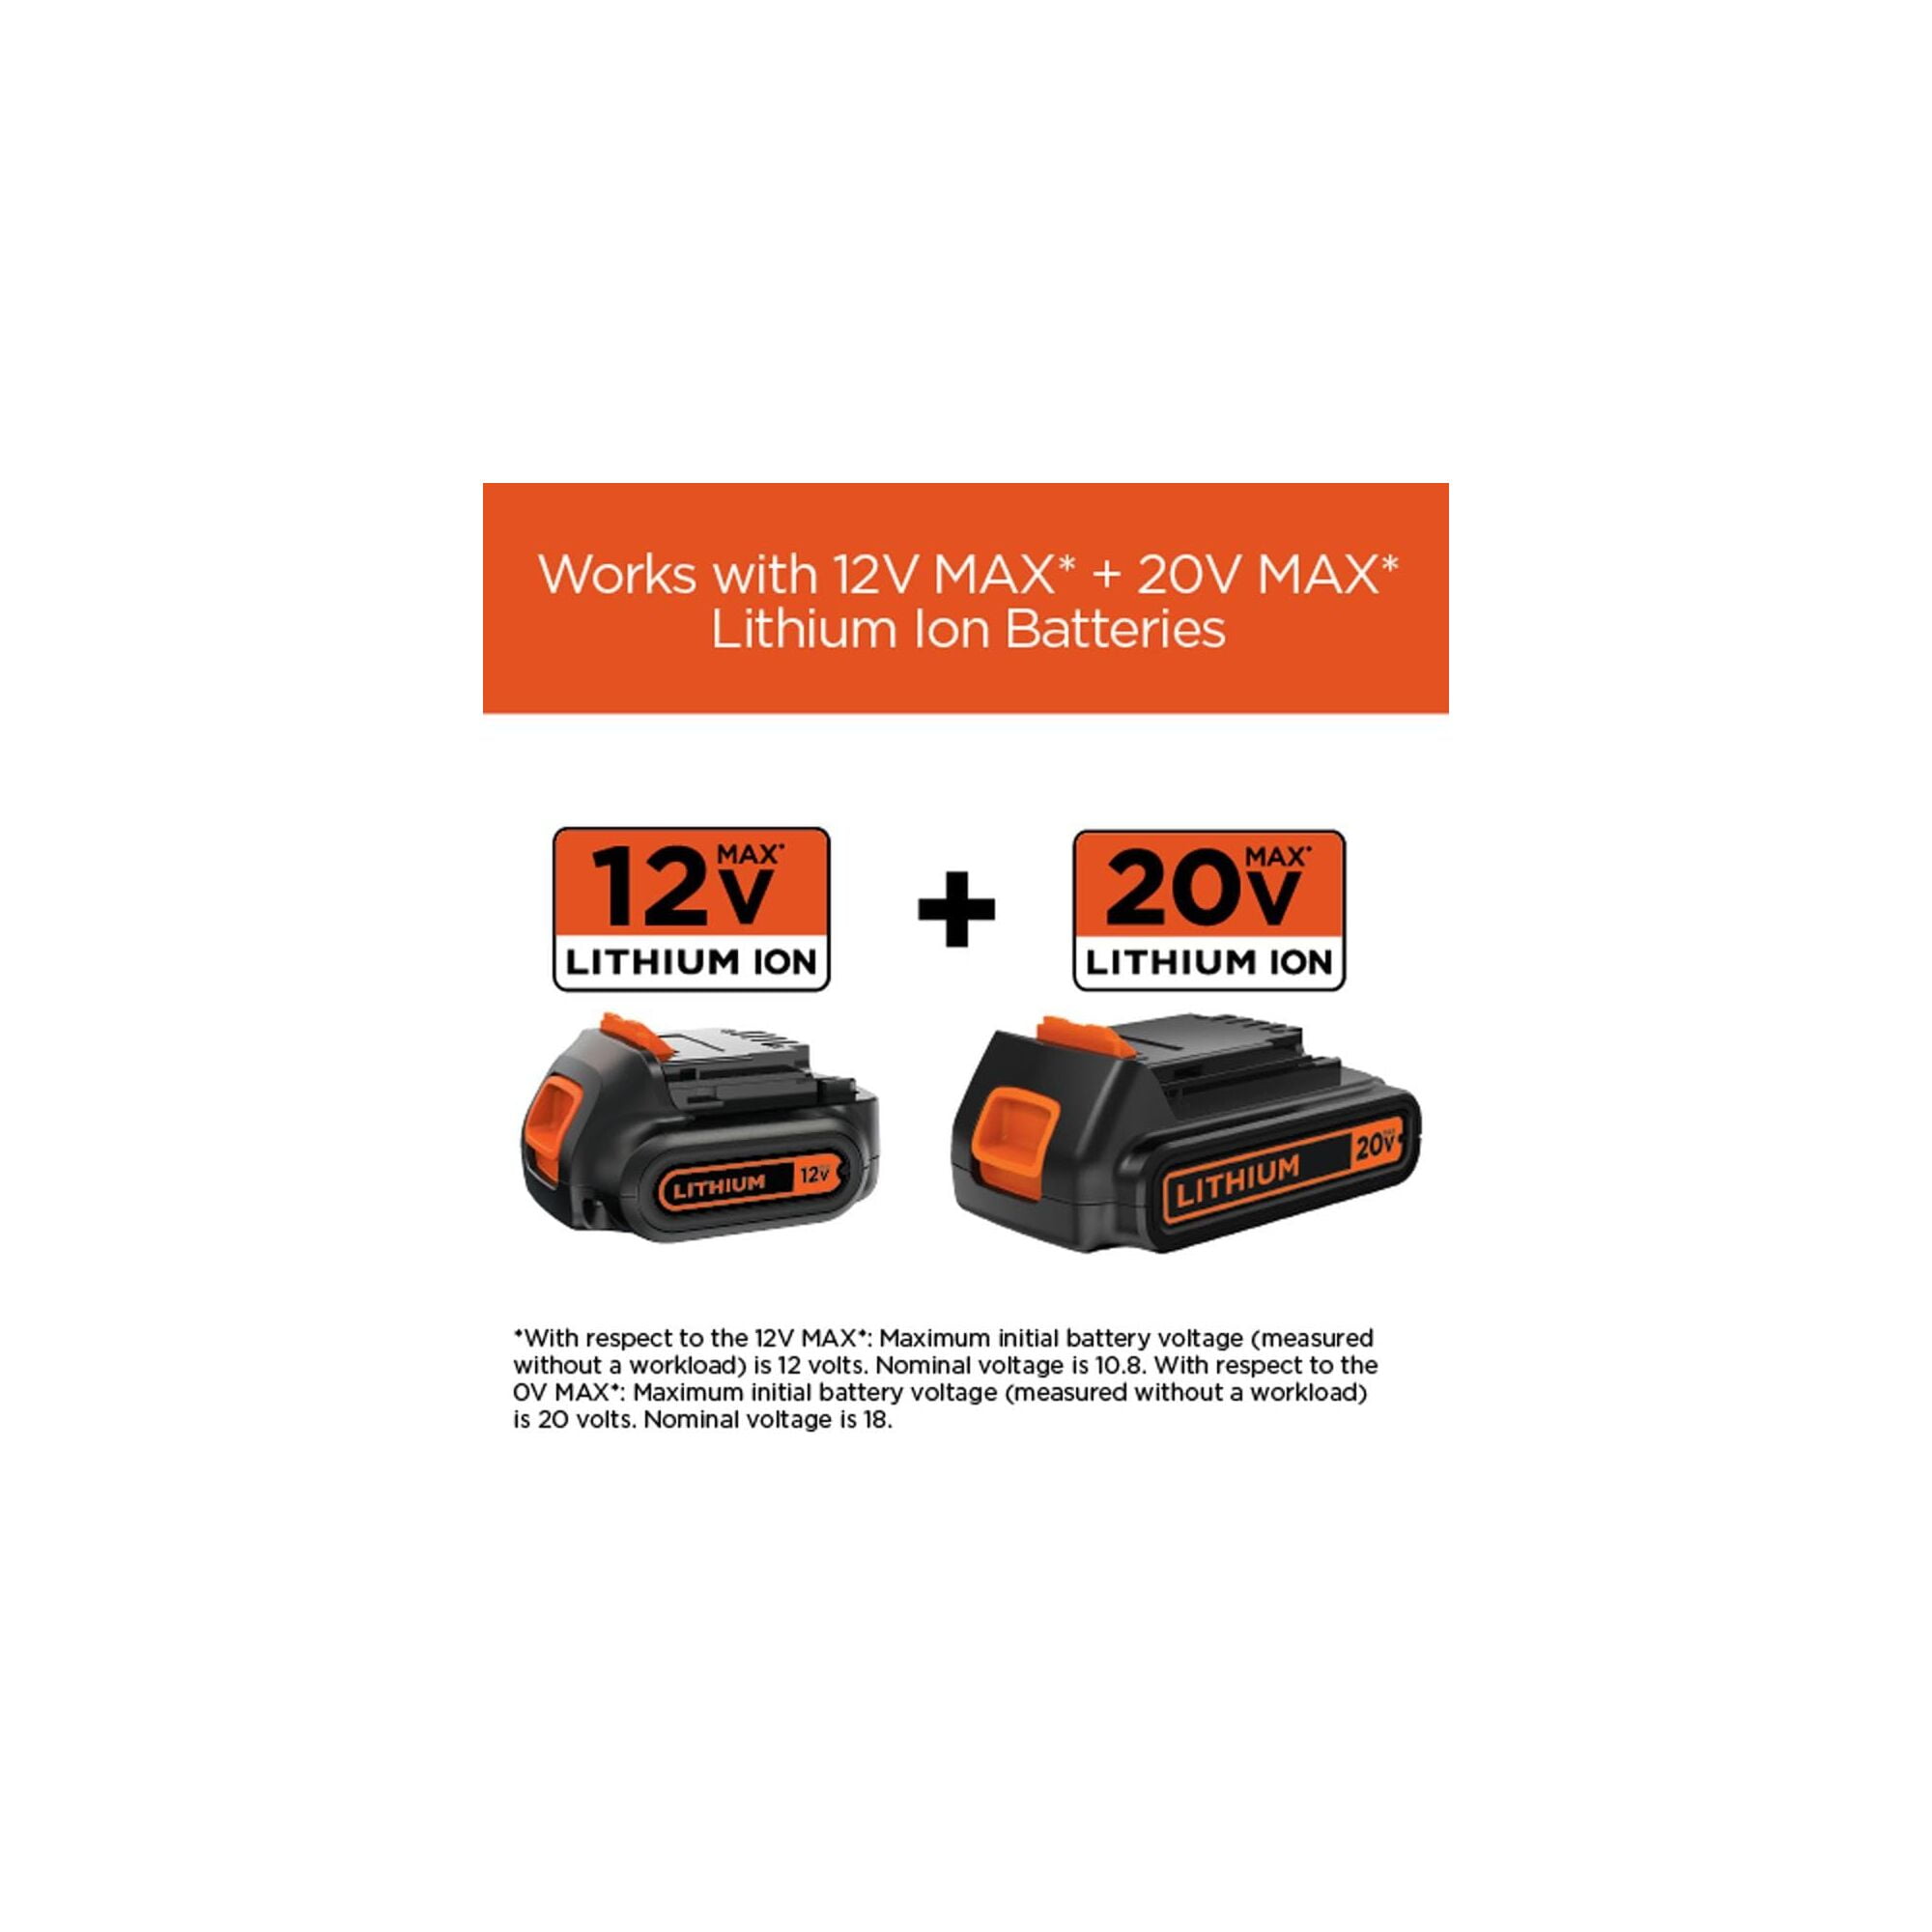 BLACK+DECKER 20V Lithium-Ion Battery Charger BDCAC202B - The Home